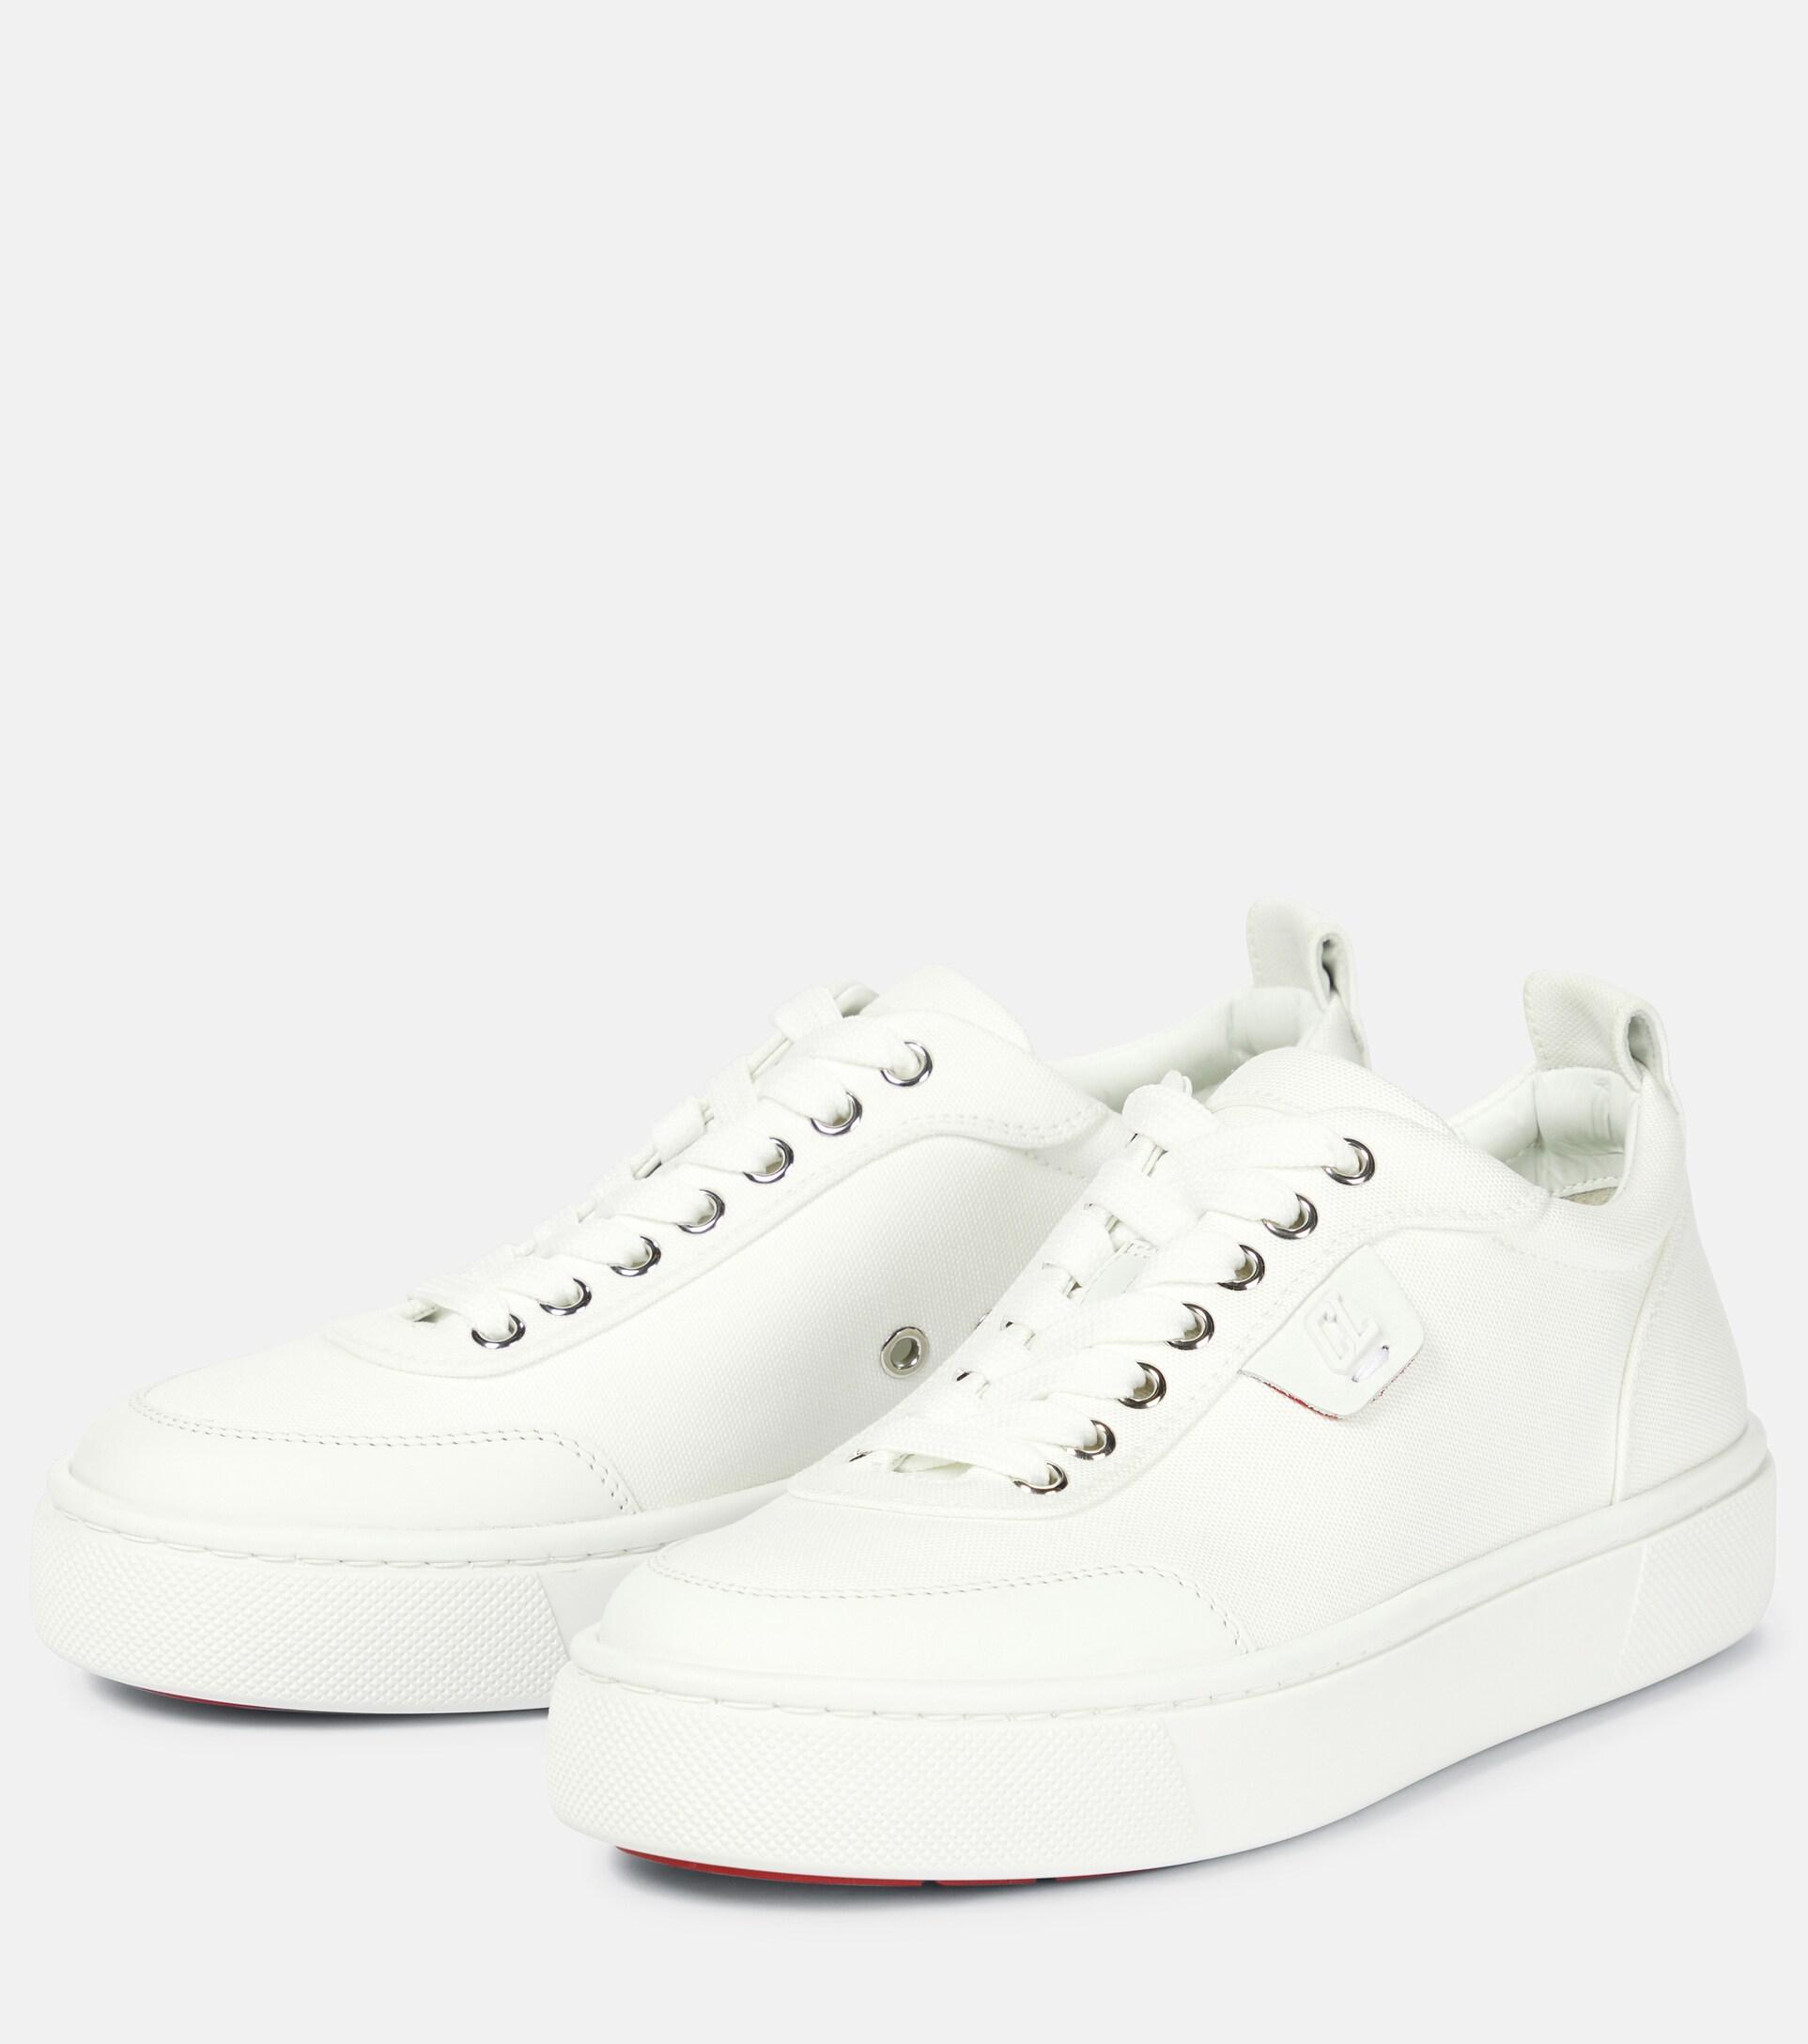 Christian Louboutin Simplerui Canvas Sneakers in White | Lyst